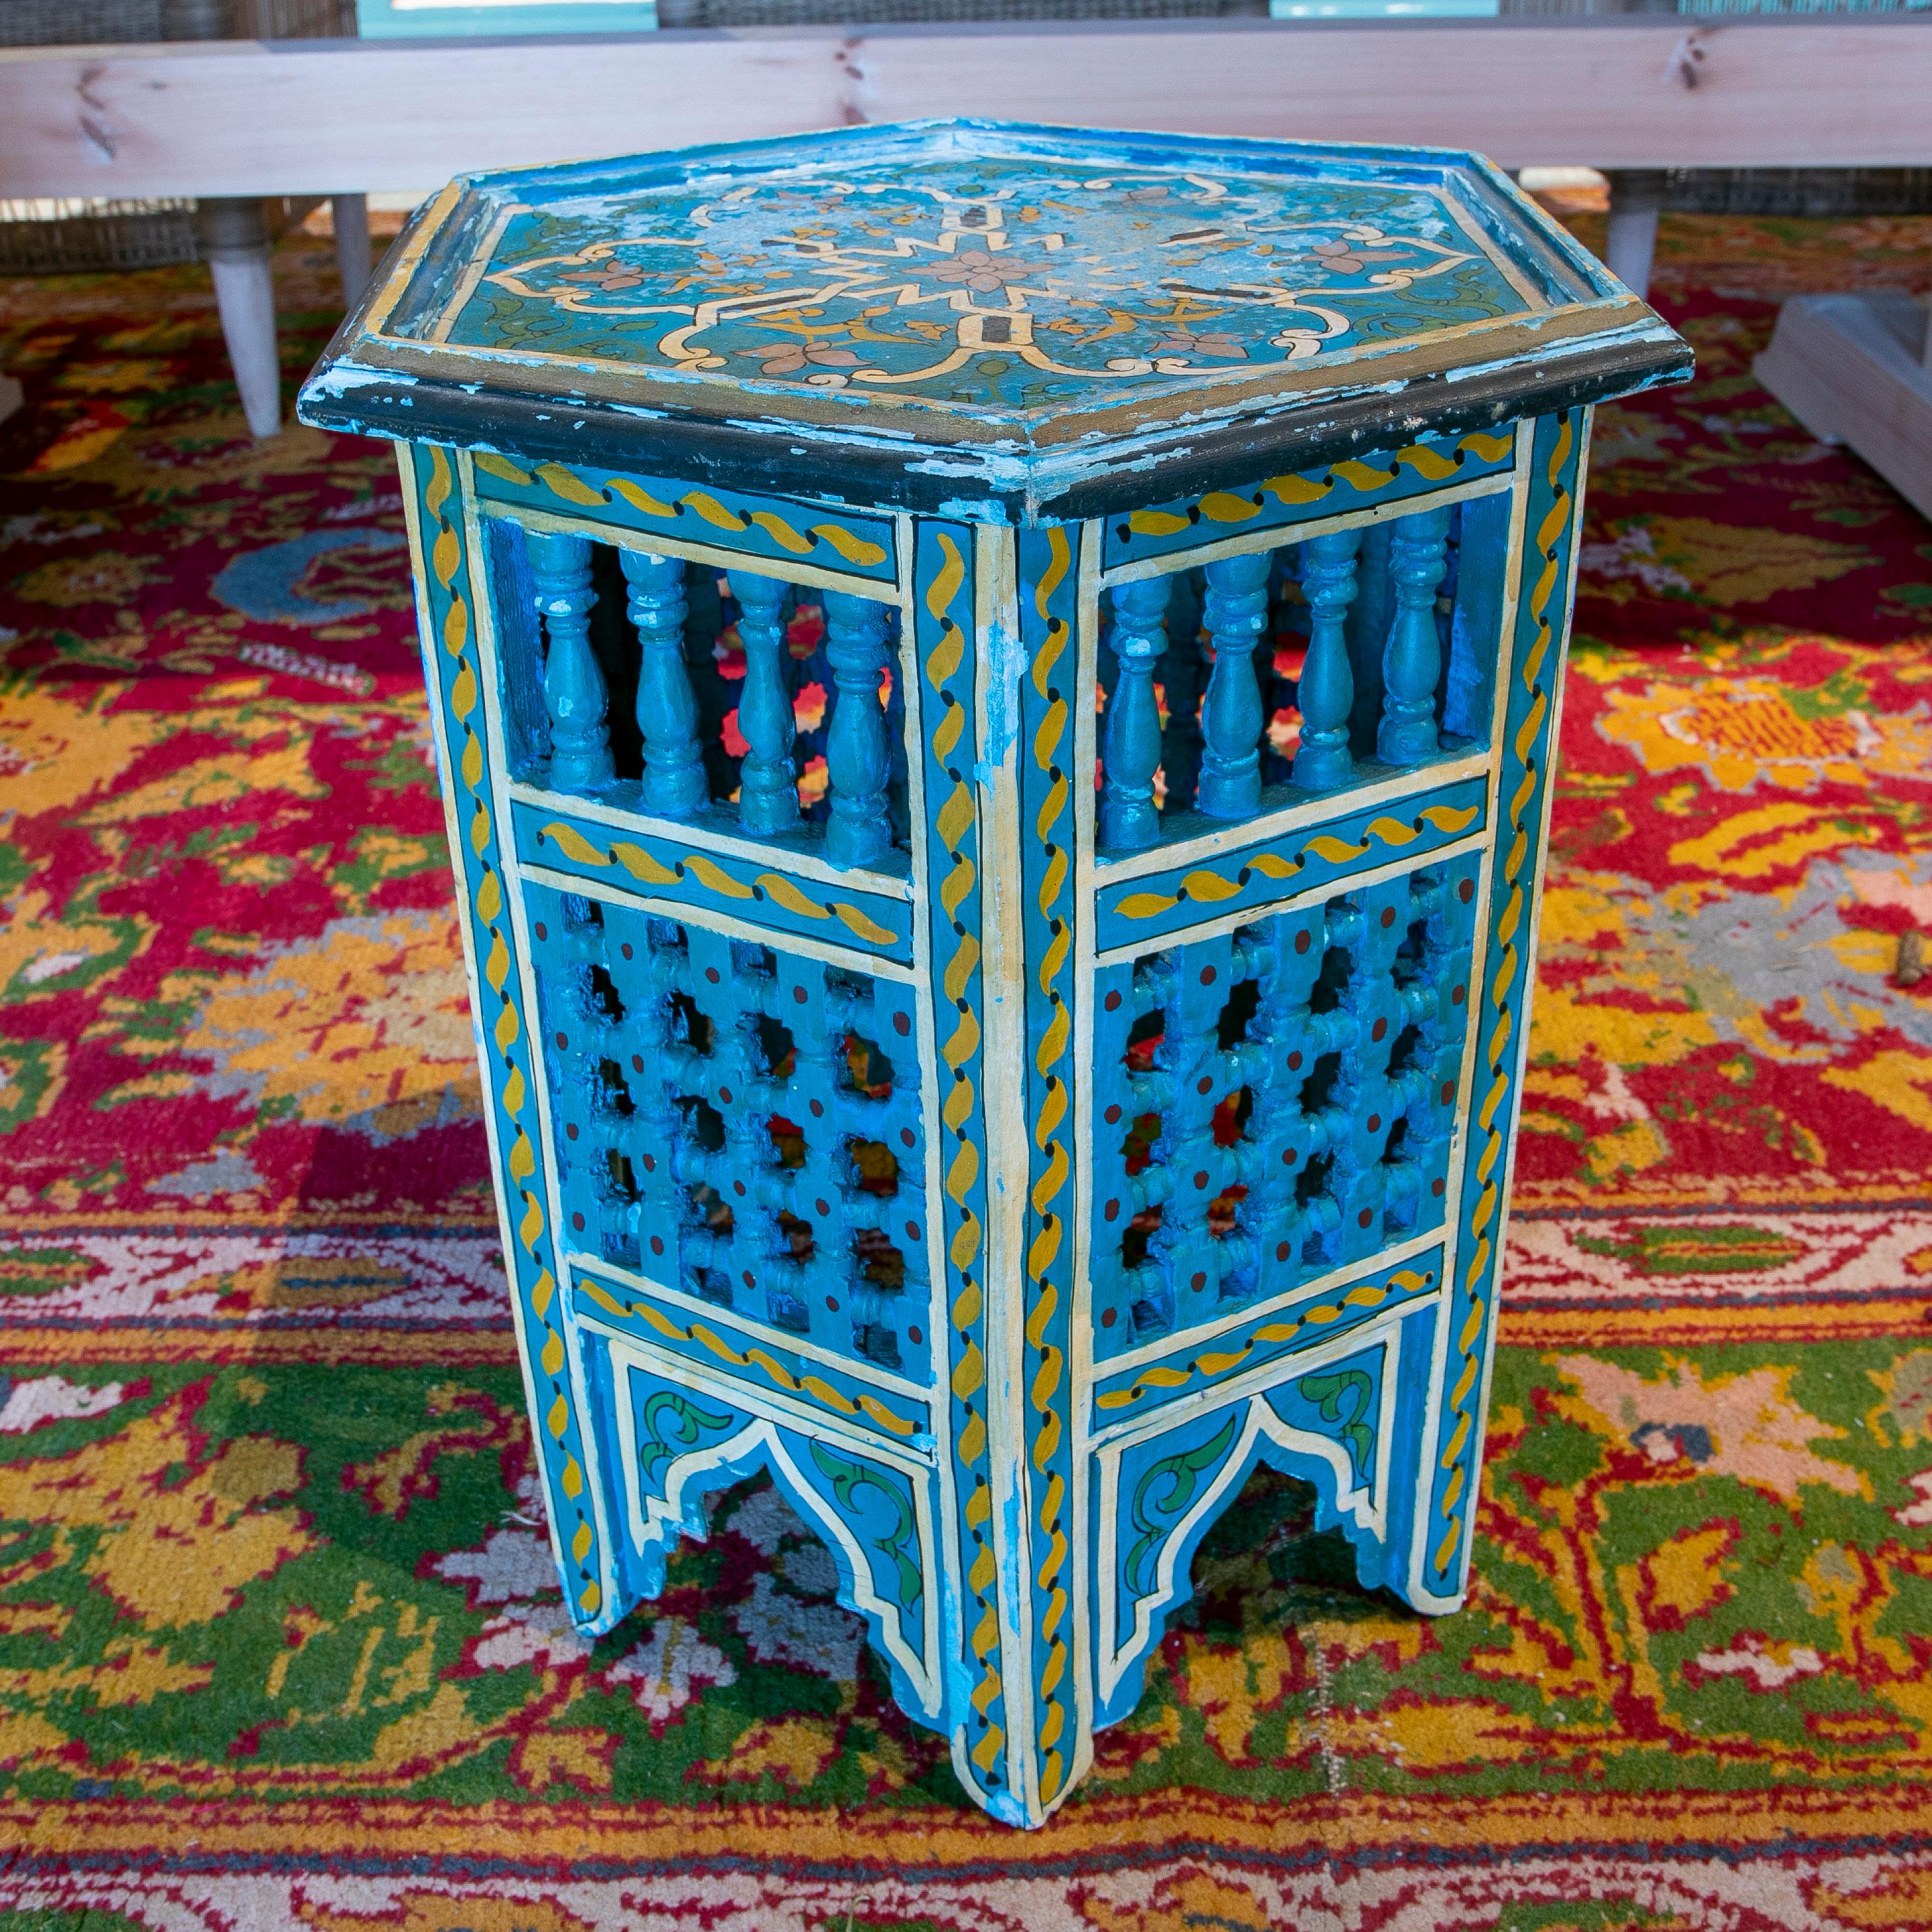 Vintage 1950s Moroccan hand-painted blue pedestal table with floral and geometric designs in traditional Mediterranean colours, Moucharabieh fret work and Moorish arches decoration. 

African folk Art handcrafted by skilled artisans in Marrakesh.